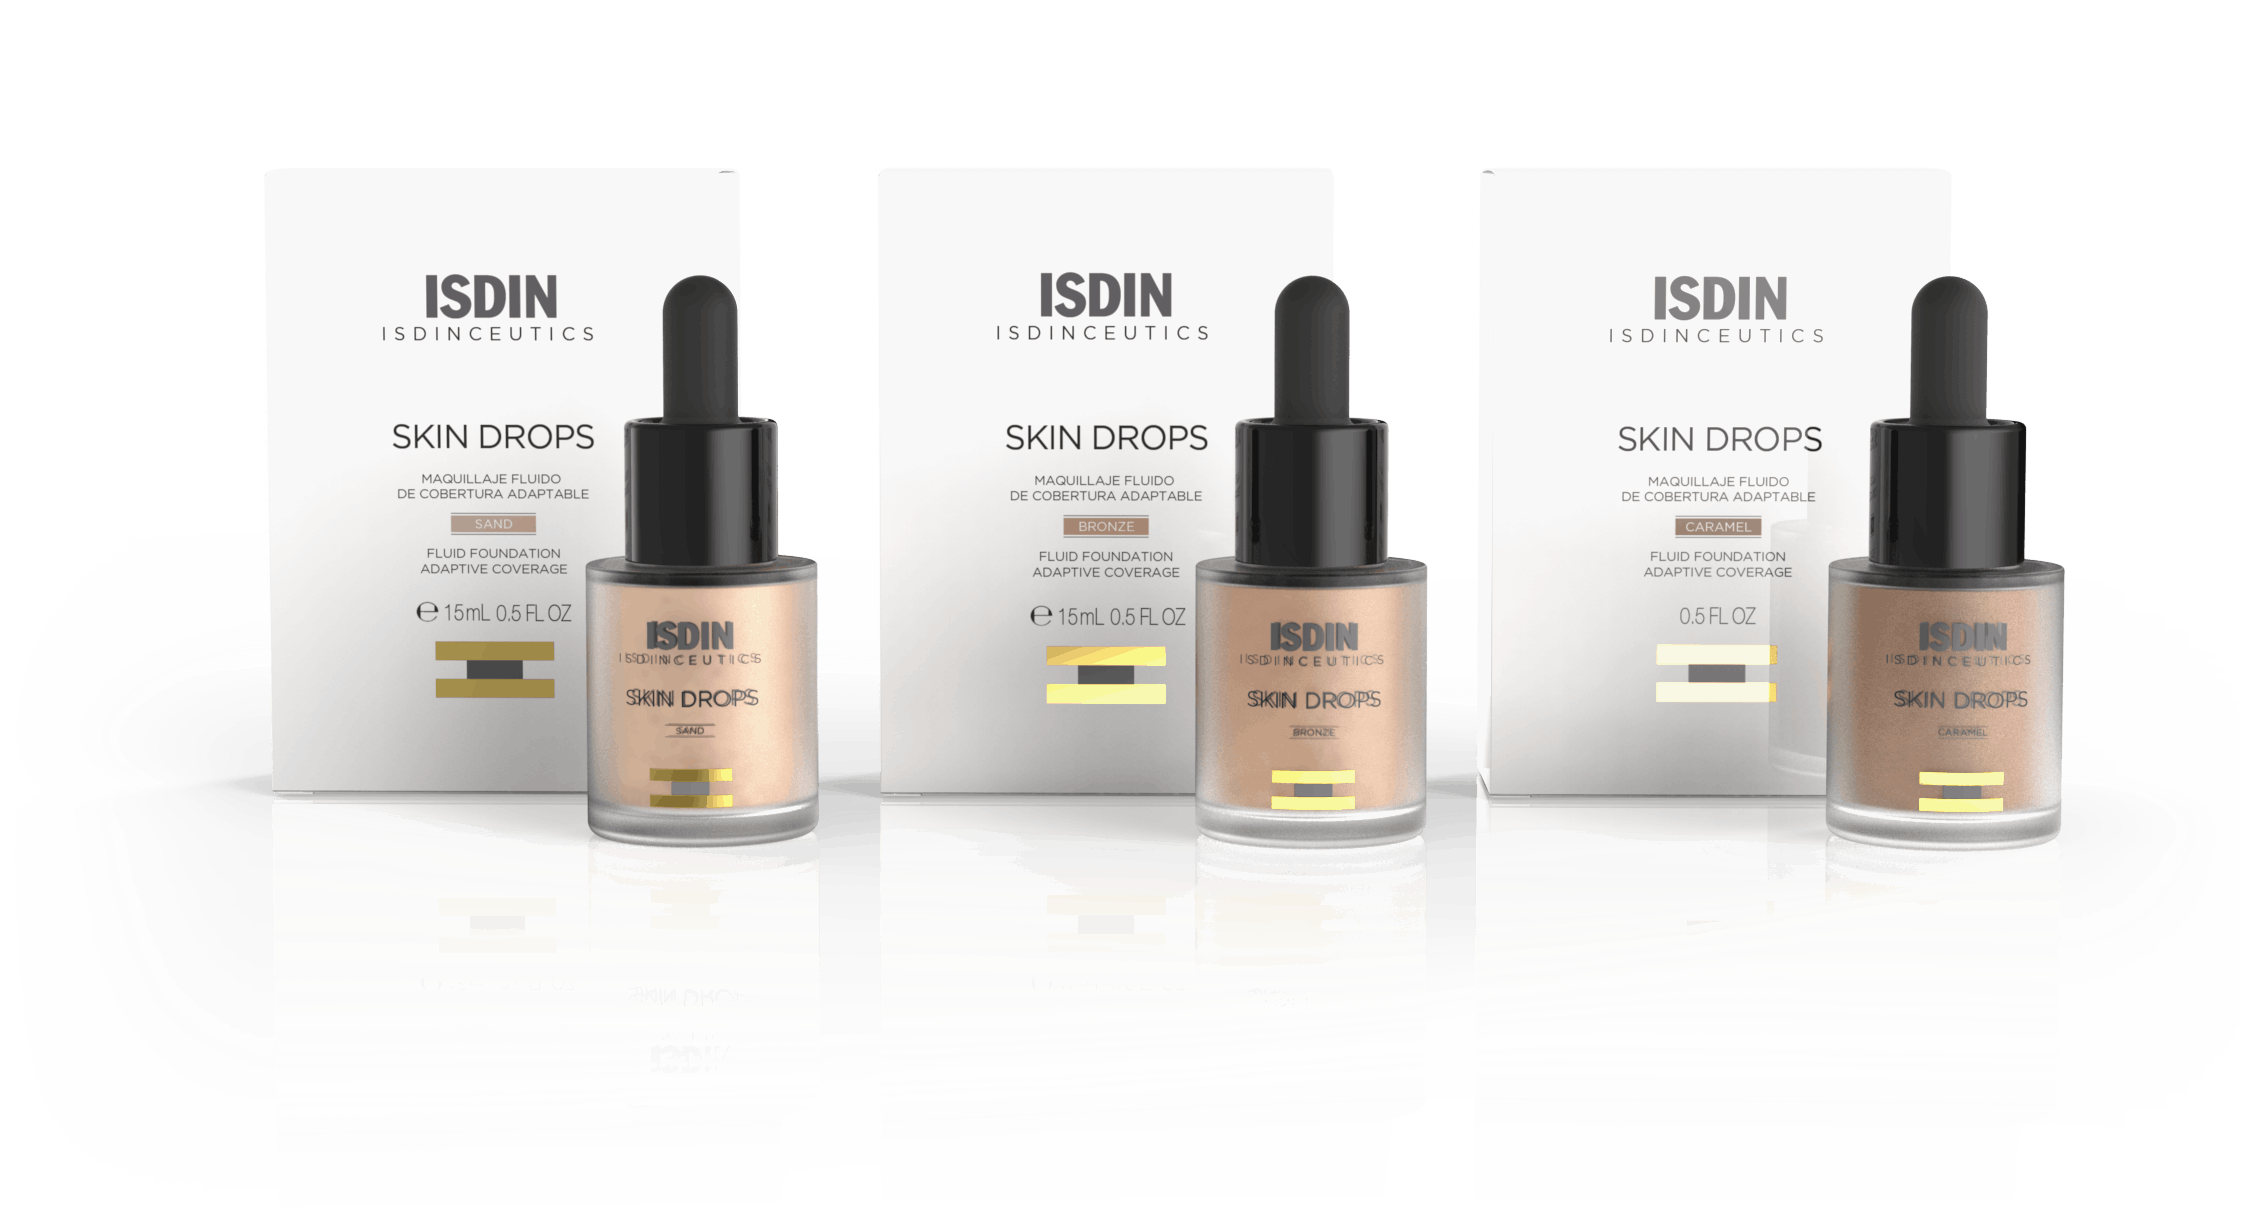 https://core4-imported.imgix.net/dermwire/imported/RENDE%20SKIN%20DROPS%20USA%20A1[1].jpg.png?auto=compress,format&max-w=300